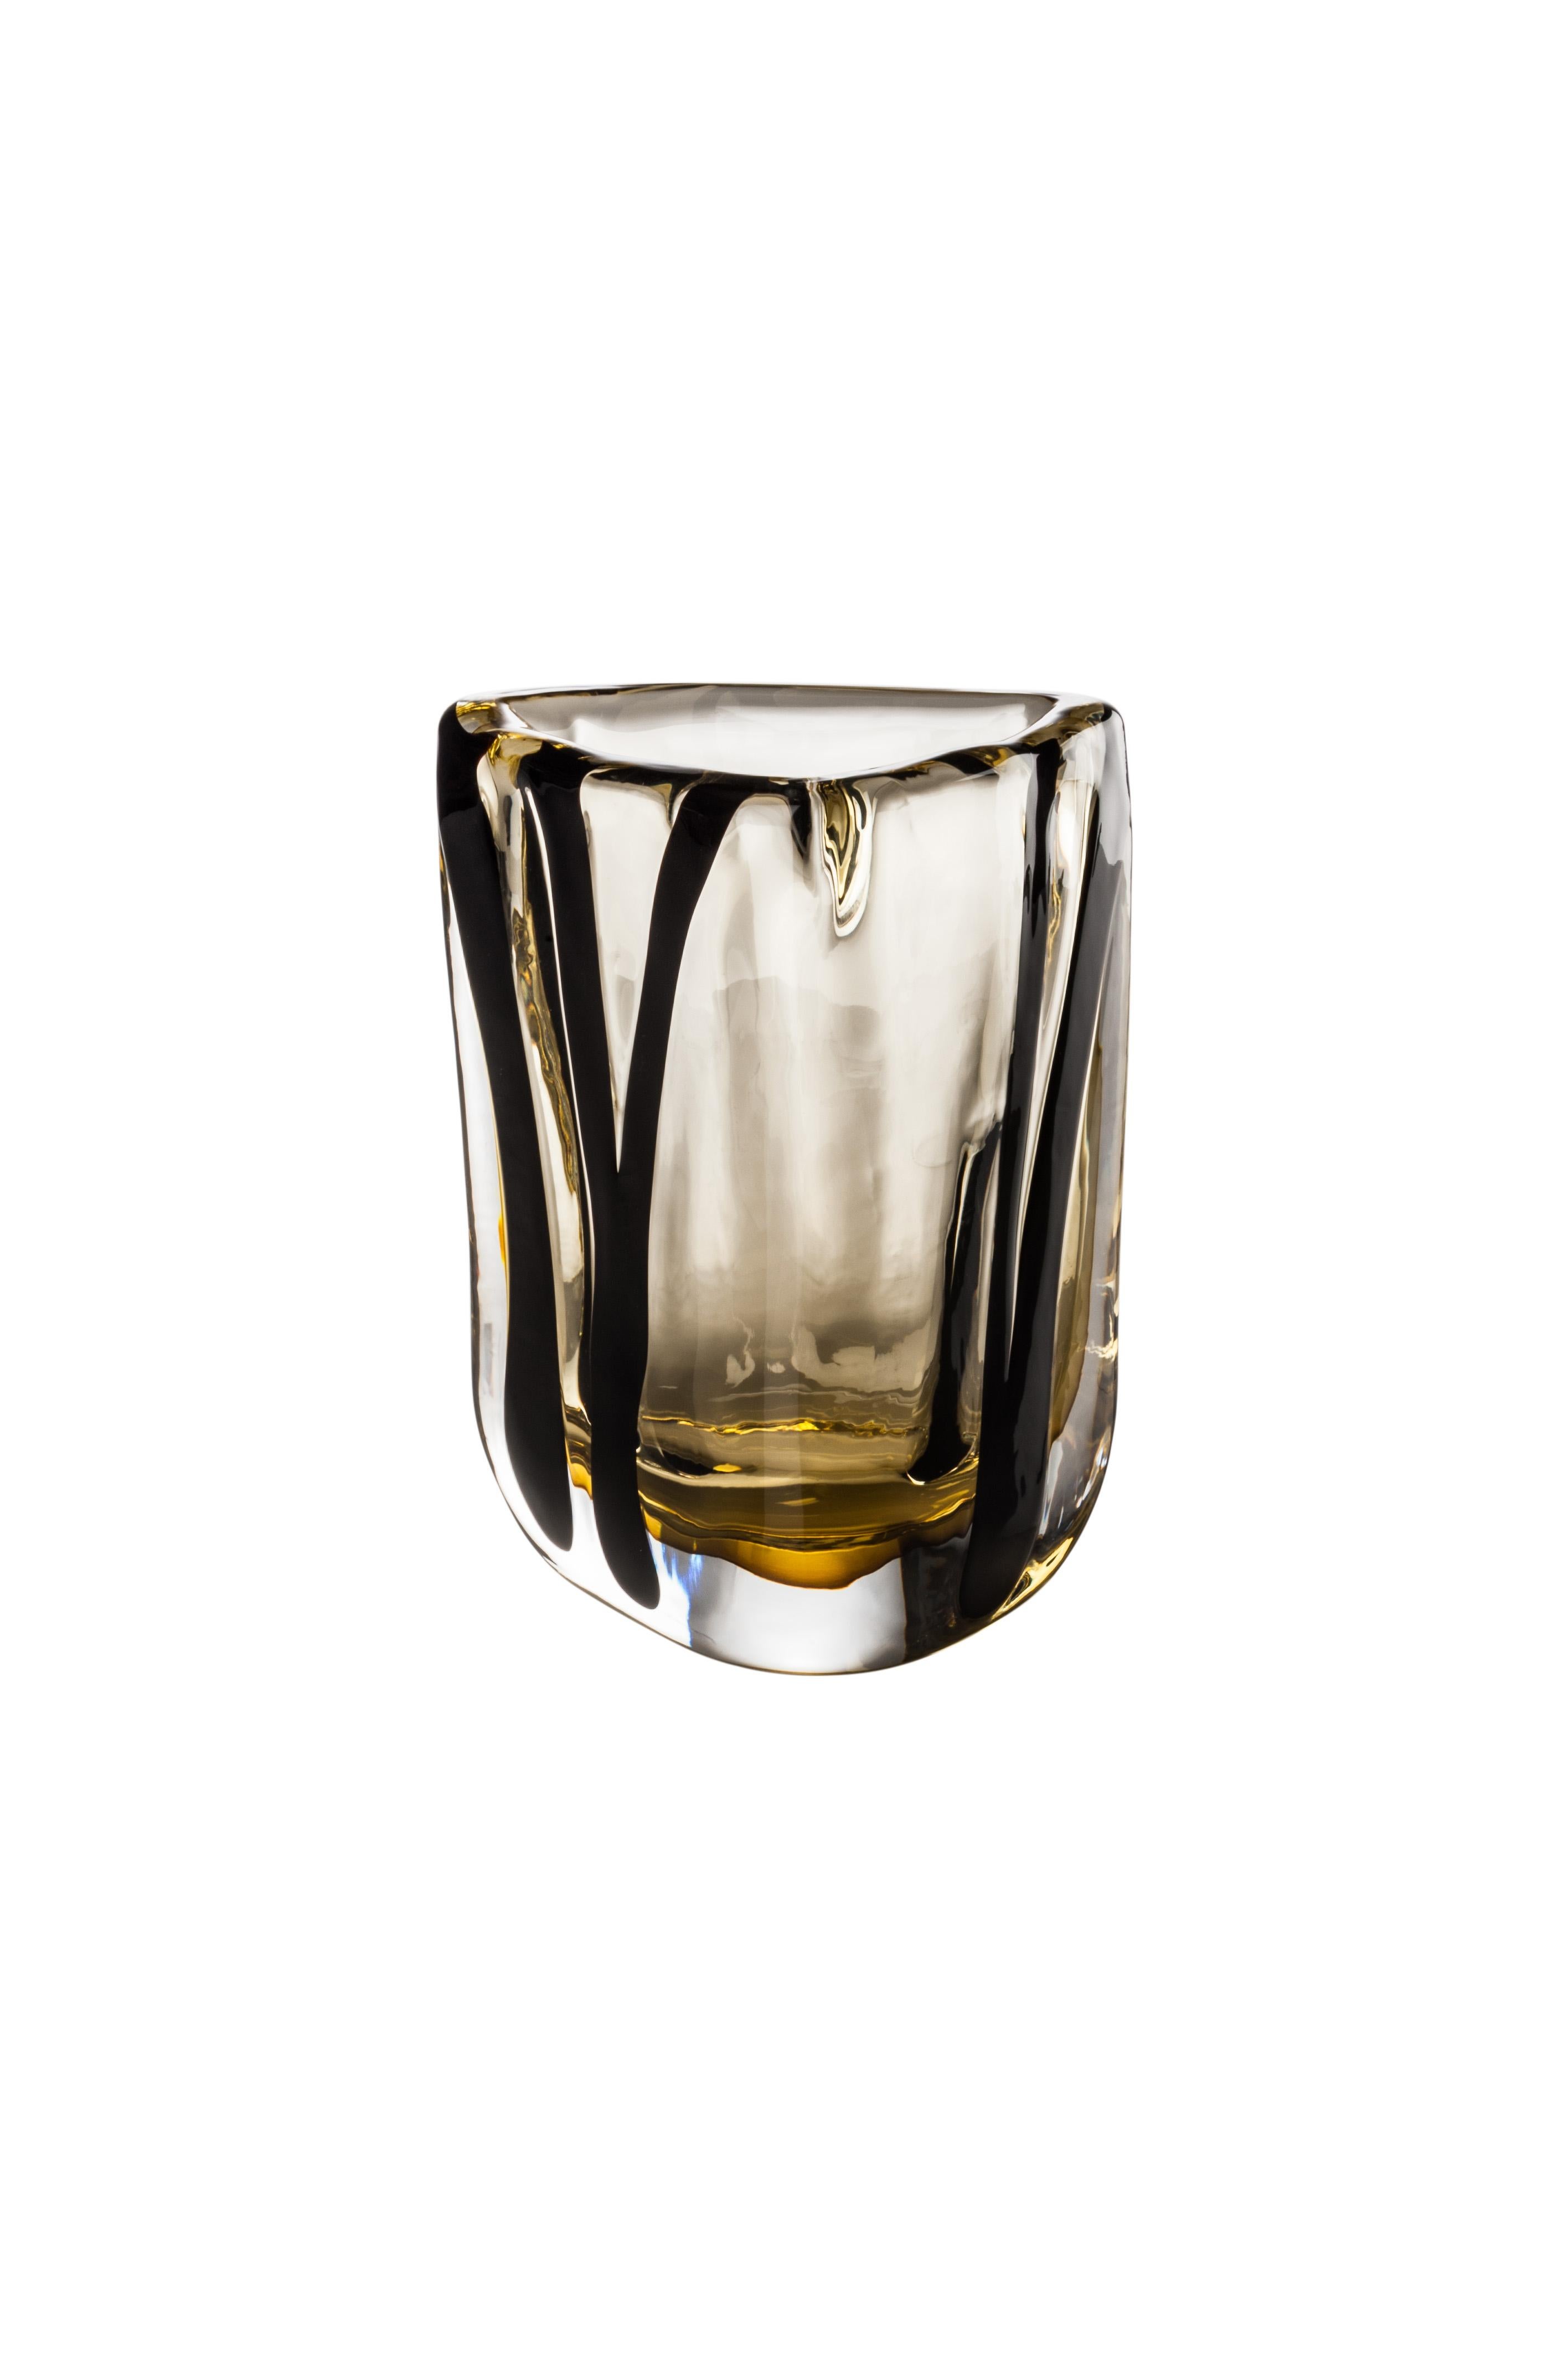 Venini glass vase in transparent crystal and tea with black decoration designed by Peter Marino in 2017. Perfect for indoor home decor as container or statement piece for any room. Limited edition of only 349 works in stock.

Dimensions: 12 cm D x